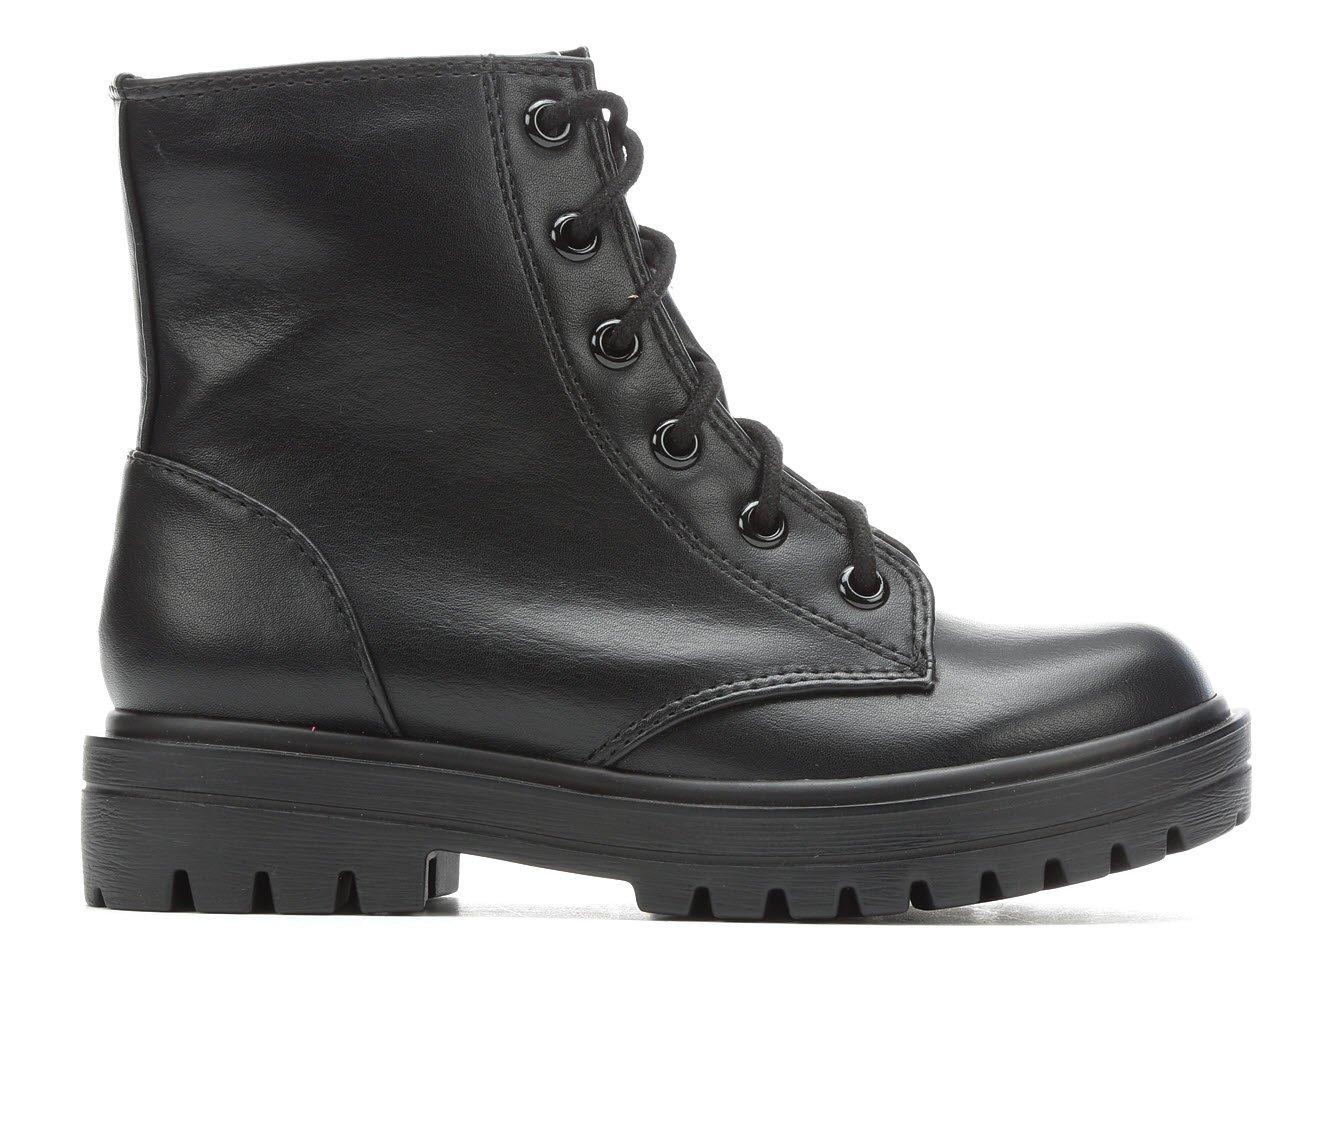 Kids' Combat Boots for Girls | Shoe Carnival